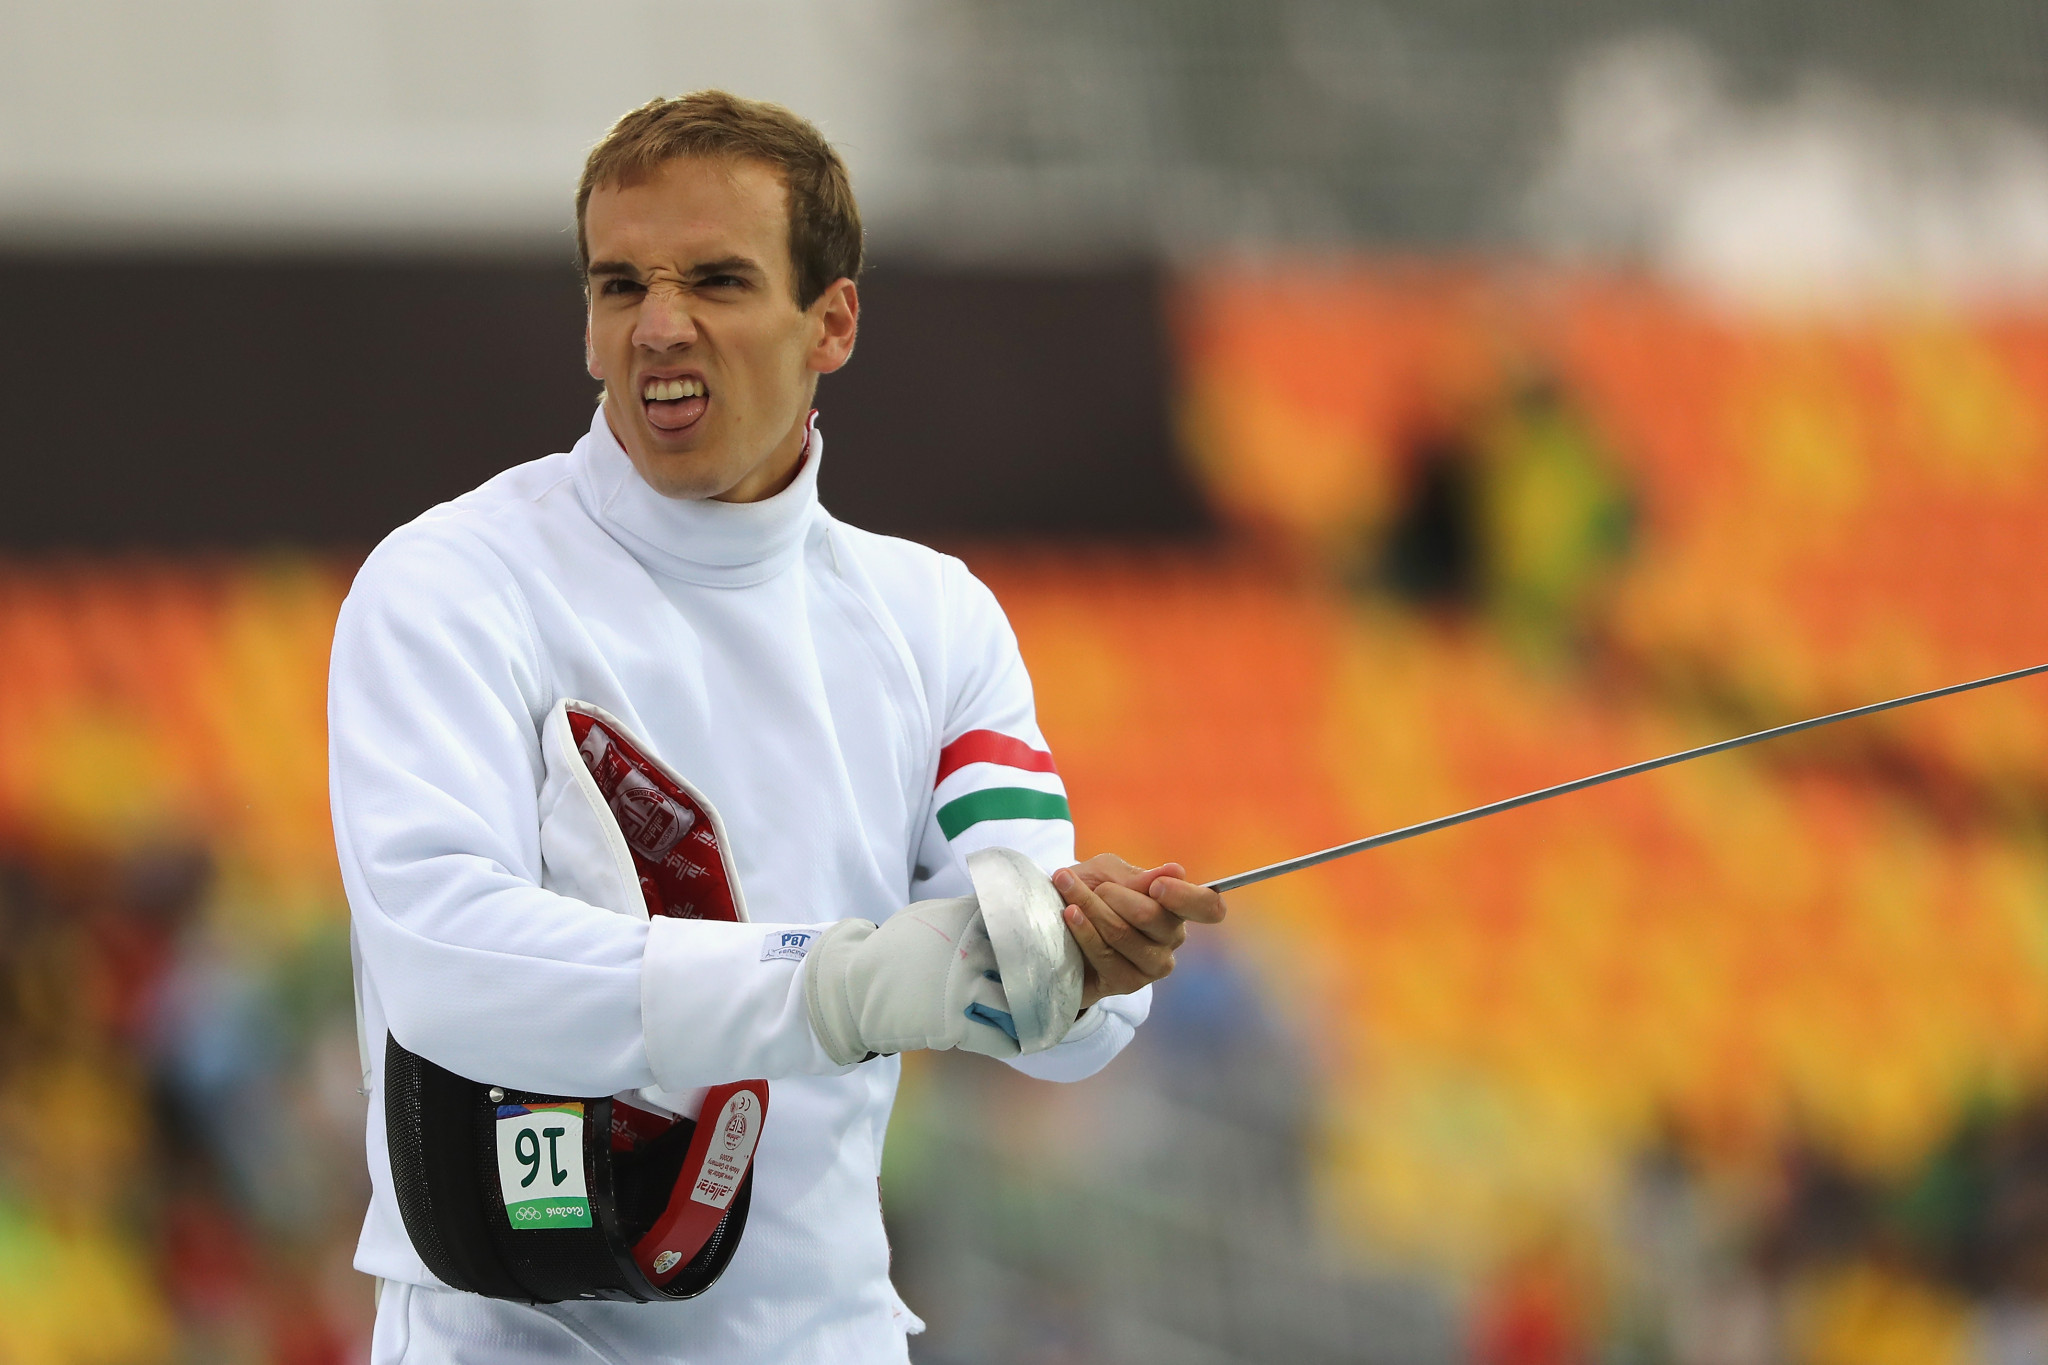 Hungarian tops men's qualification standings at UIPM World Cup